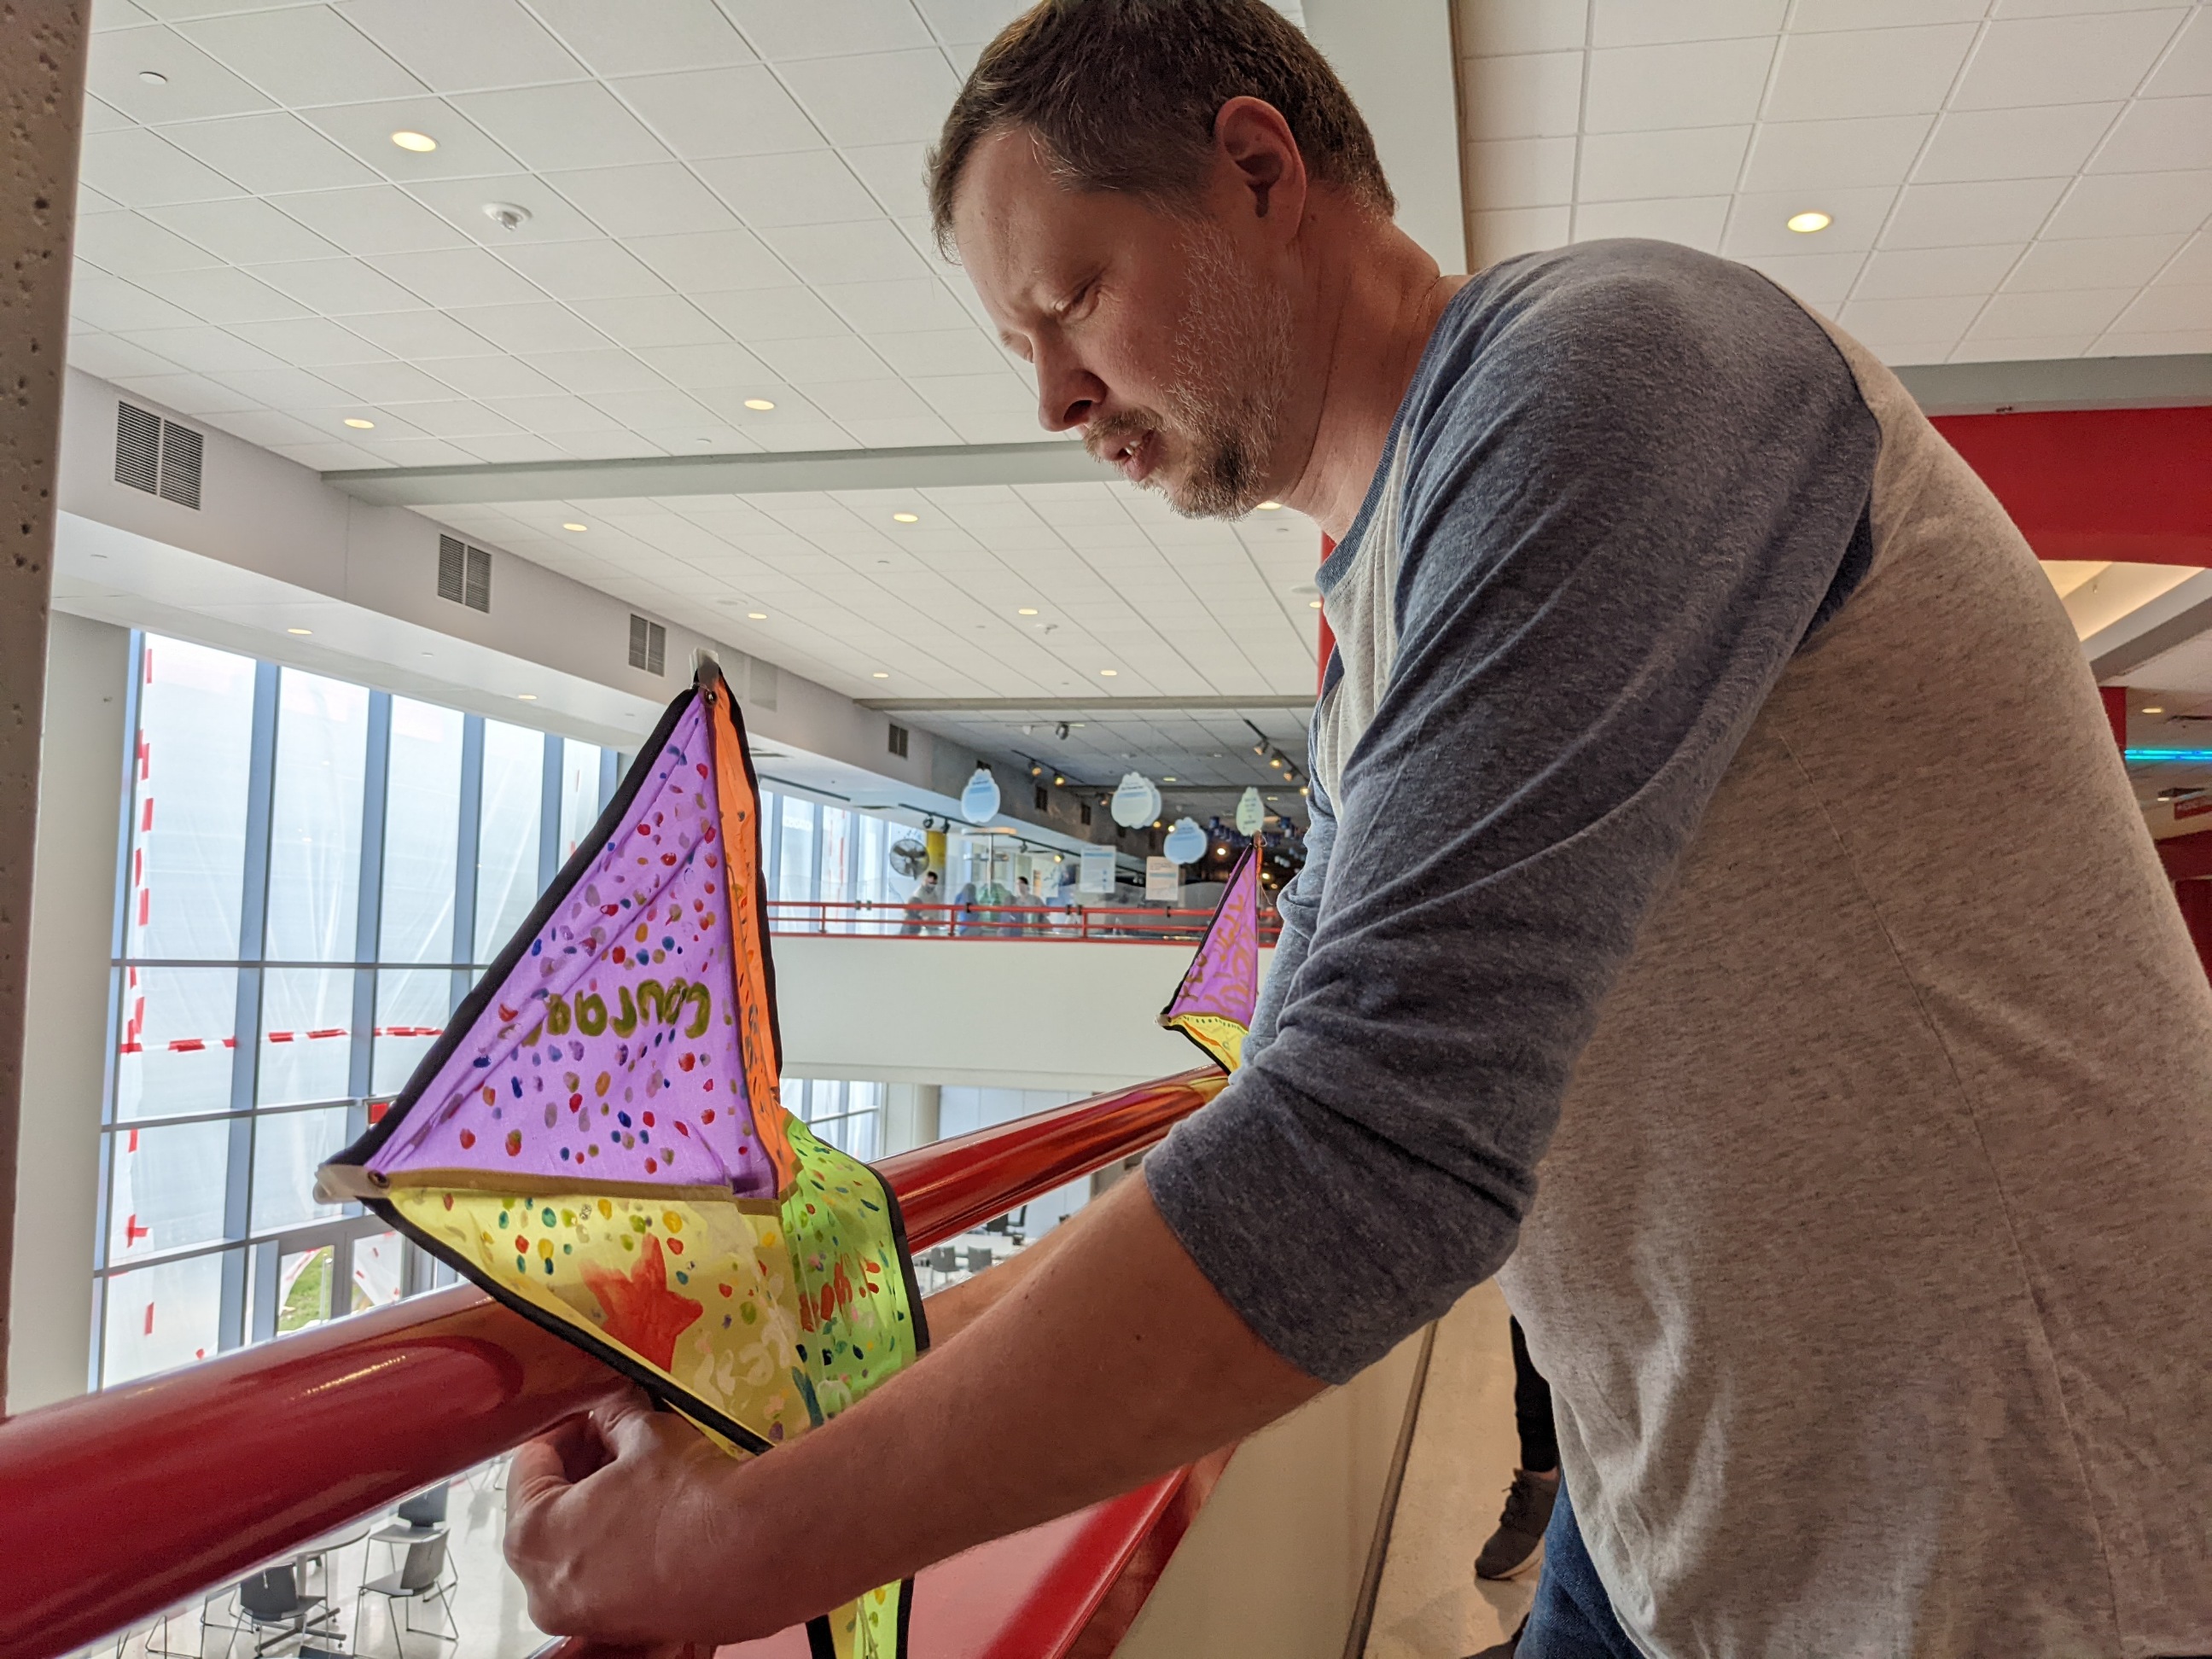 A man in a blue and grey shirt hangs a decorated kite in the Carnegie Science Center lobby